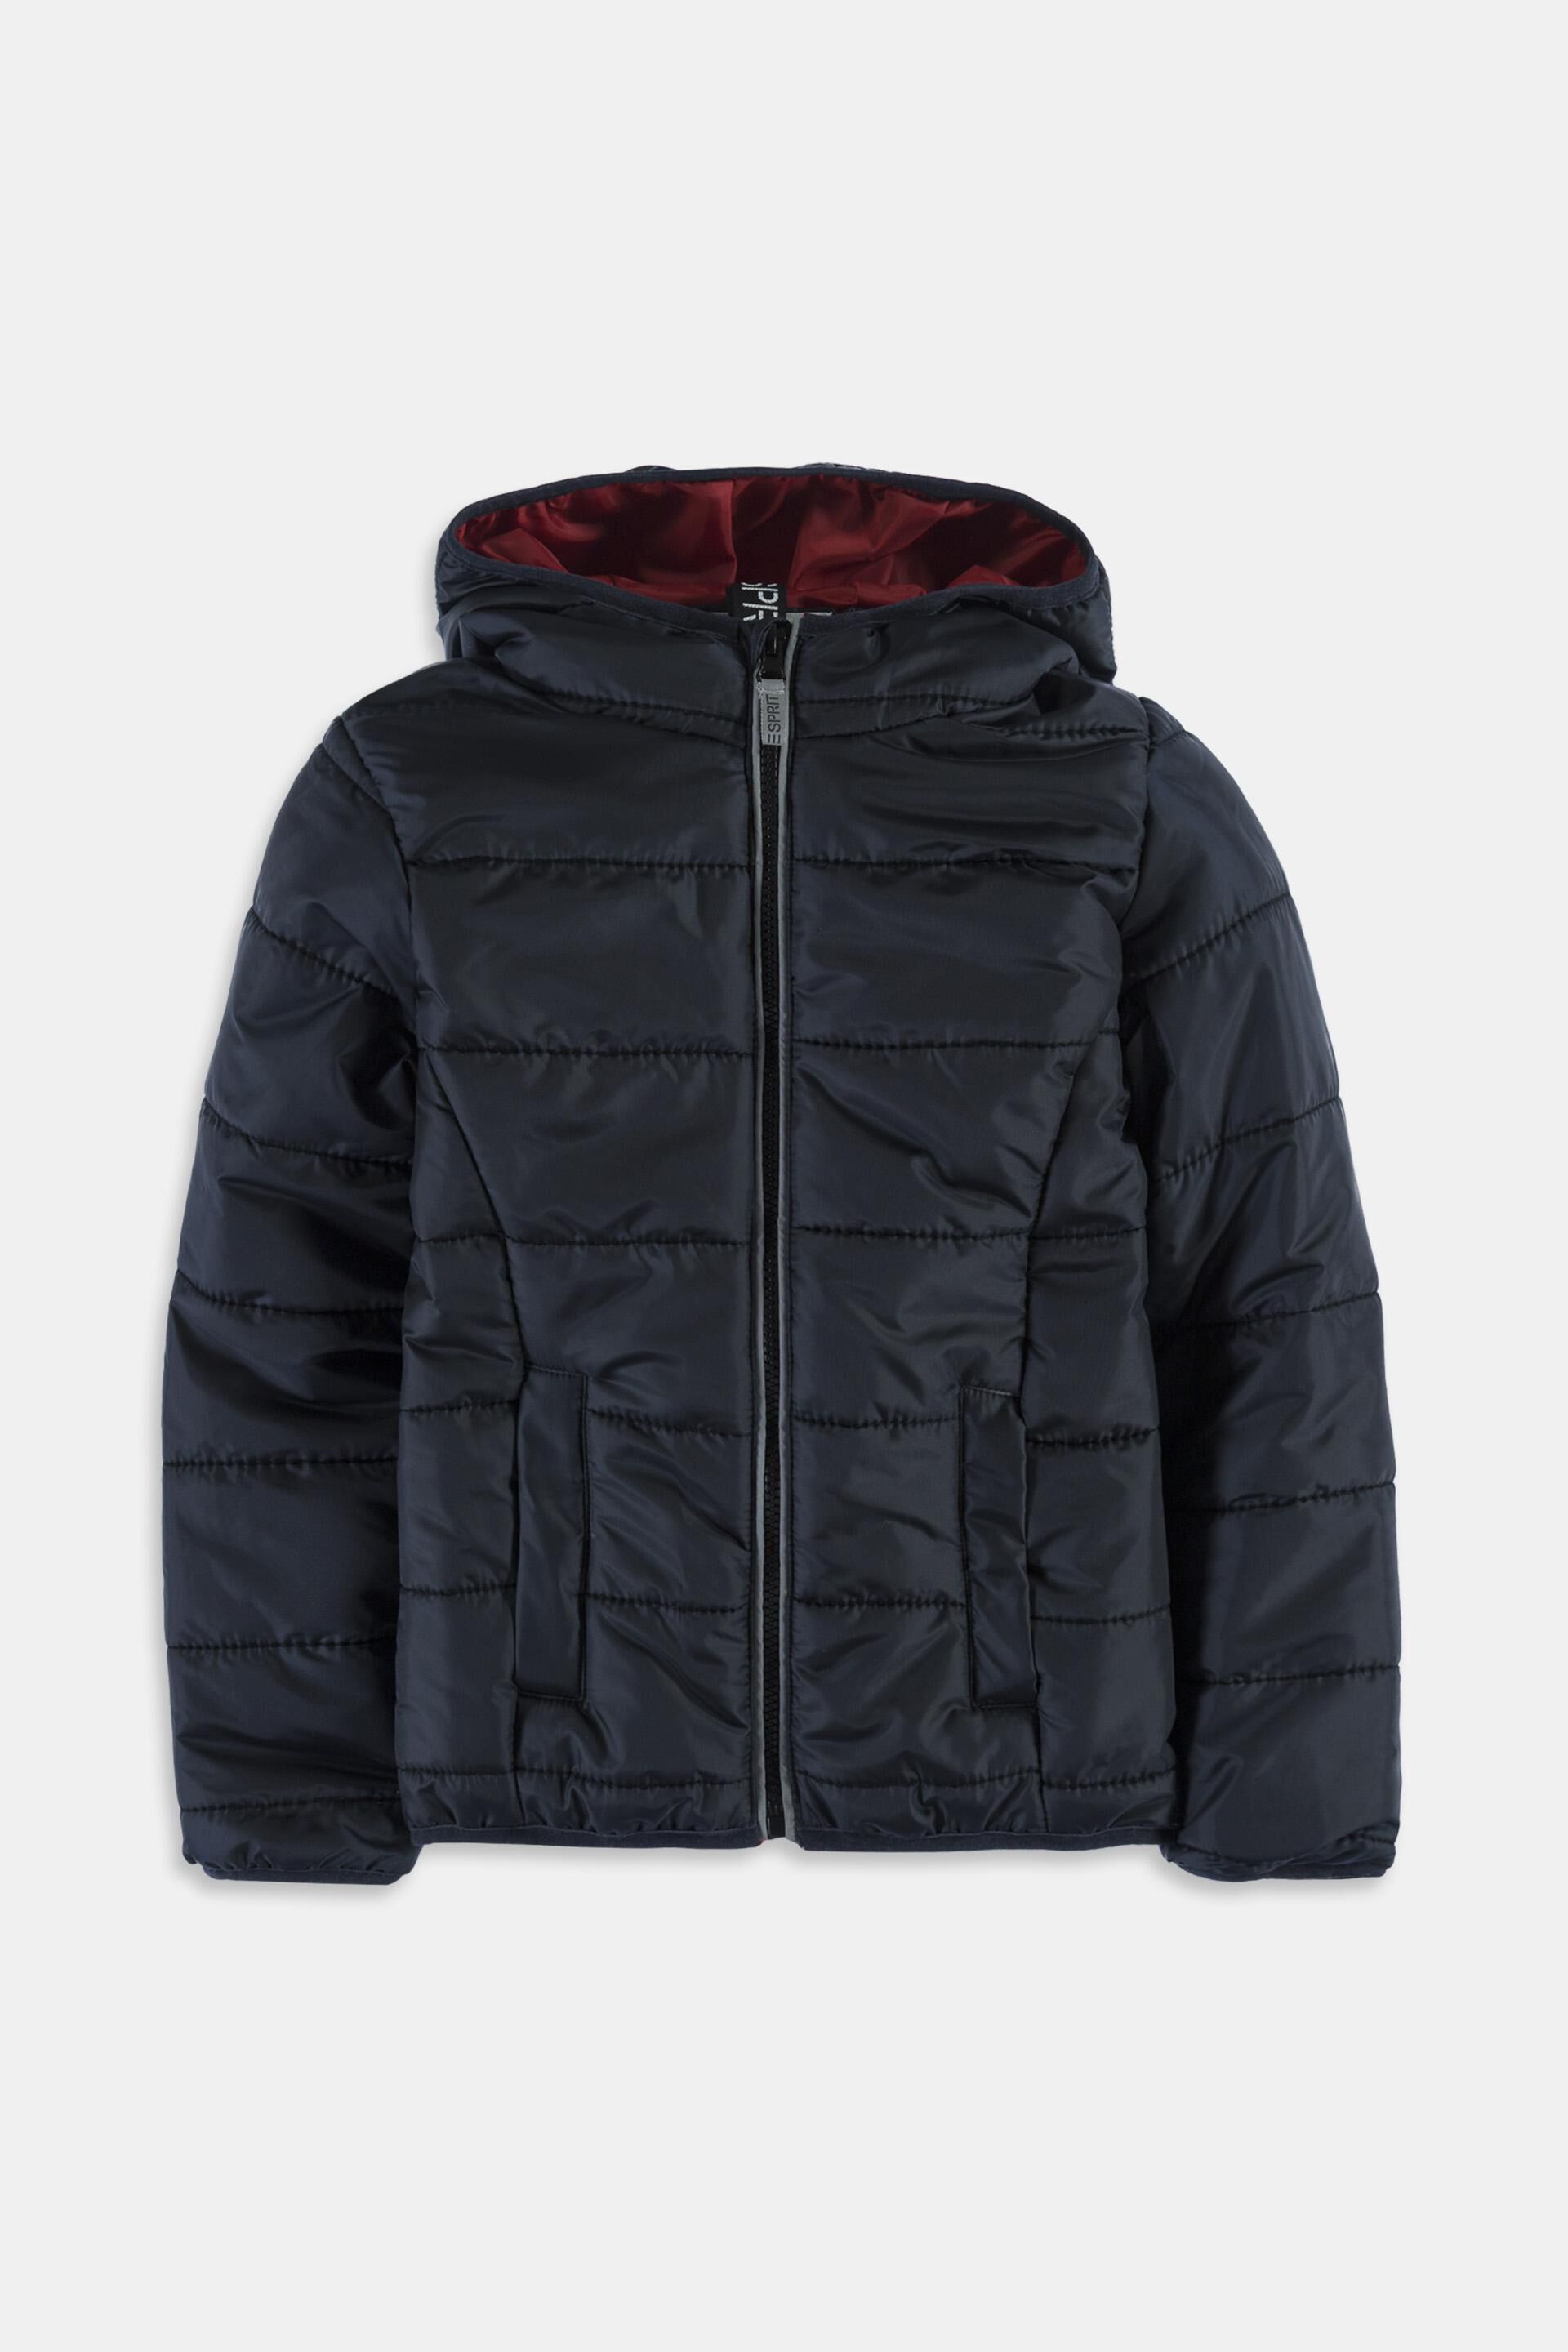 Esprit with a quilted jacket Padded hood